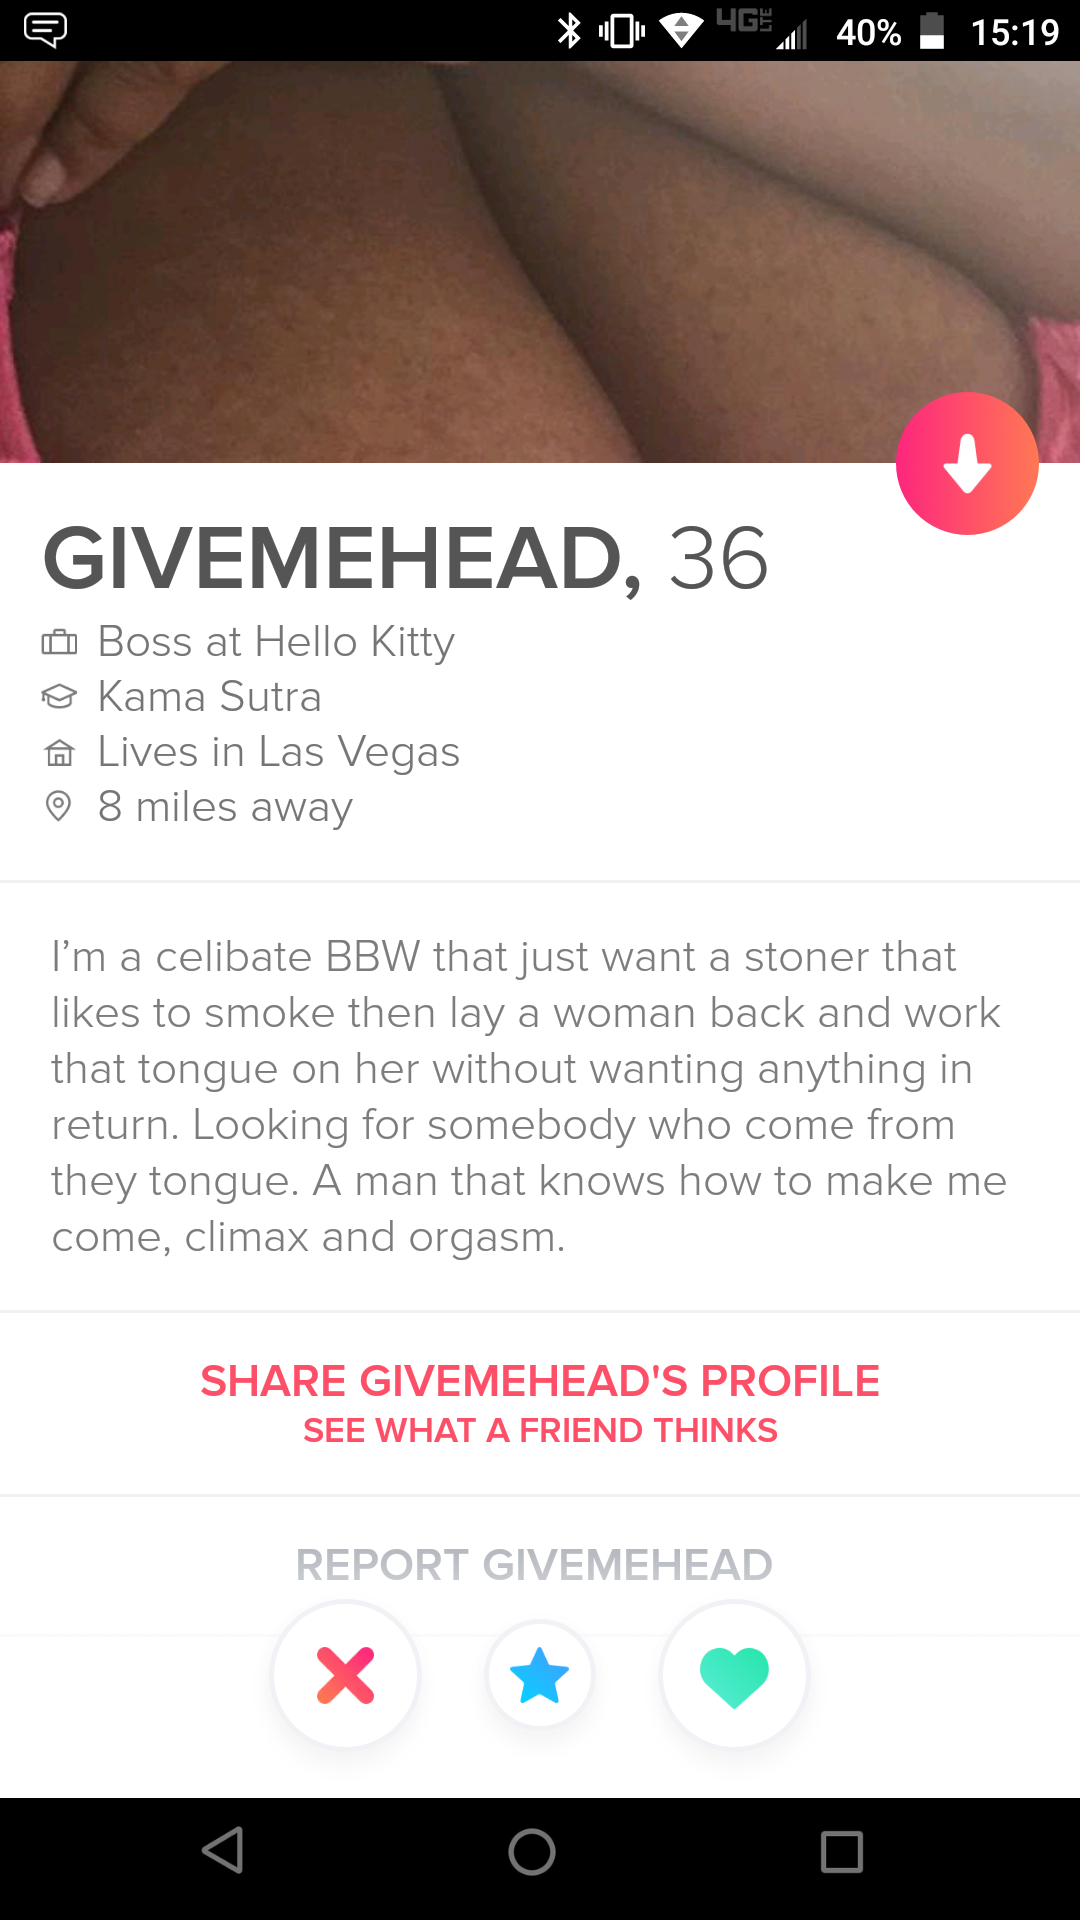 Shameless Tinder profile that says Givemehead, 36 Boss at Hello Kitty Kama Sutra Lives in Las Vegas 9 8 miles away I'm a celibate Bbw that just want a stoner that to smoke then lay a woman back and work that tongue on her without wanting anything in retur